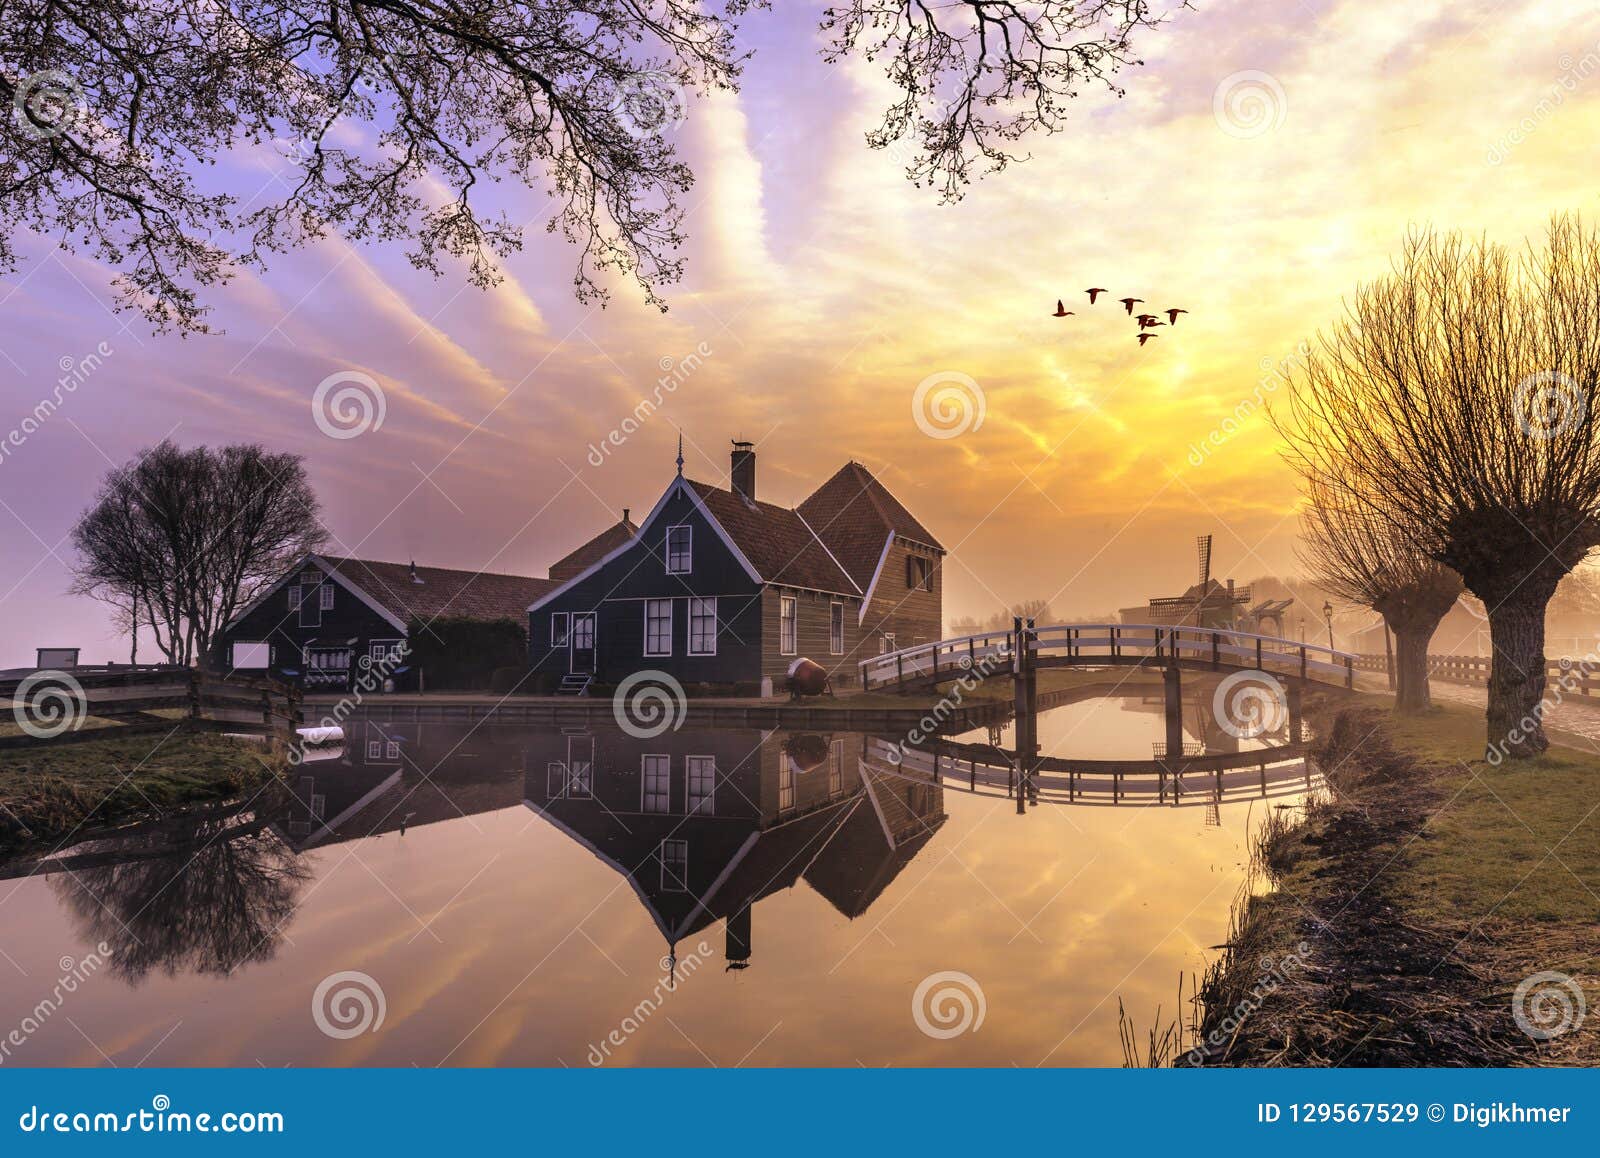 beautiful typical dutch wooden houses architecture mirrored on